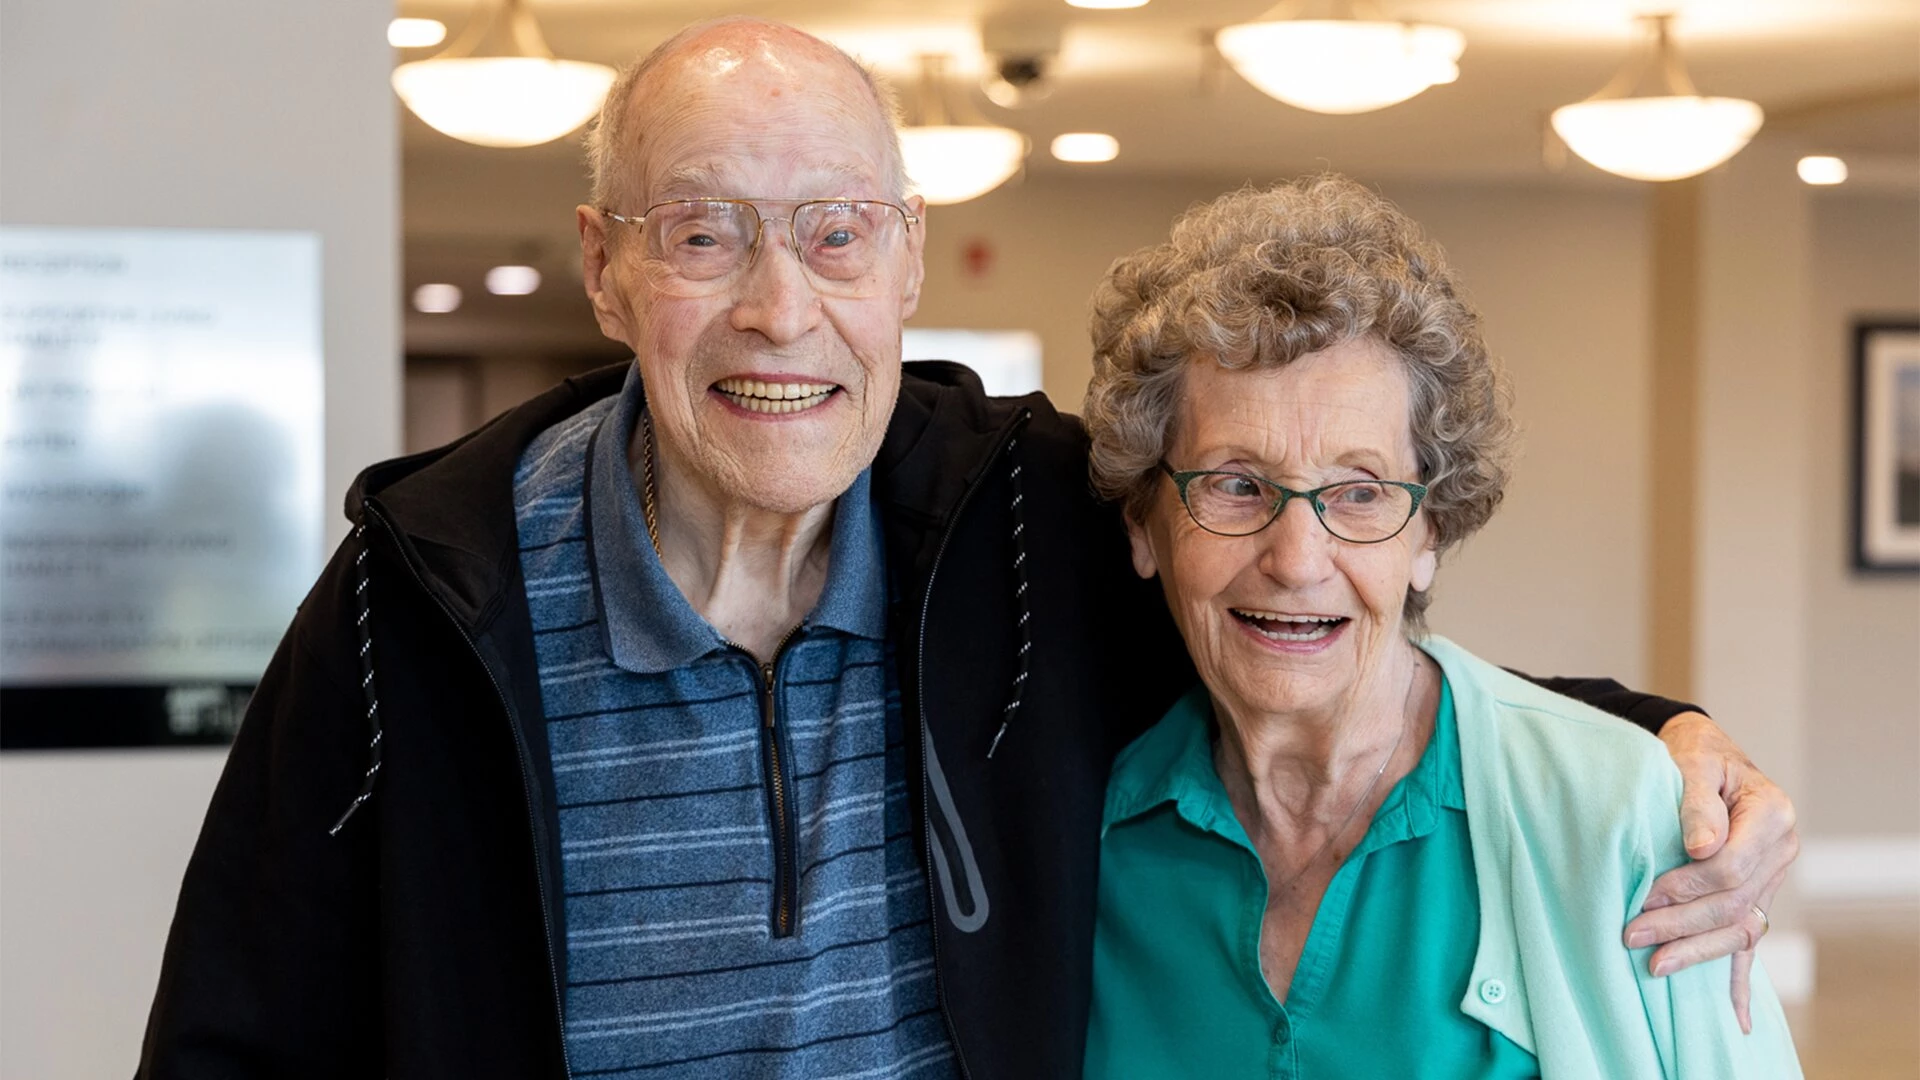 An elderly couple is happy and hugging one other.